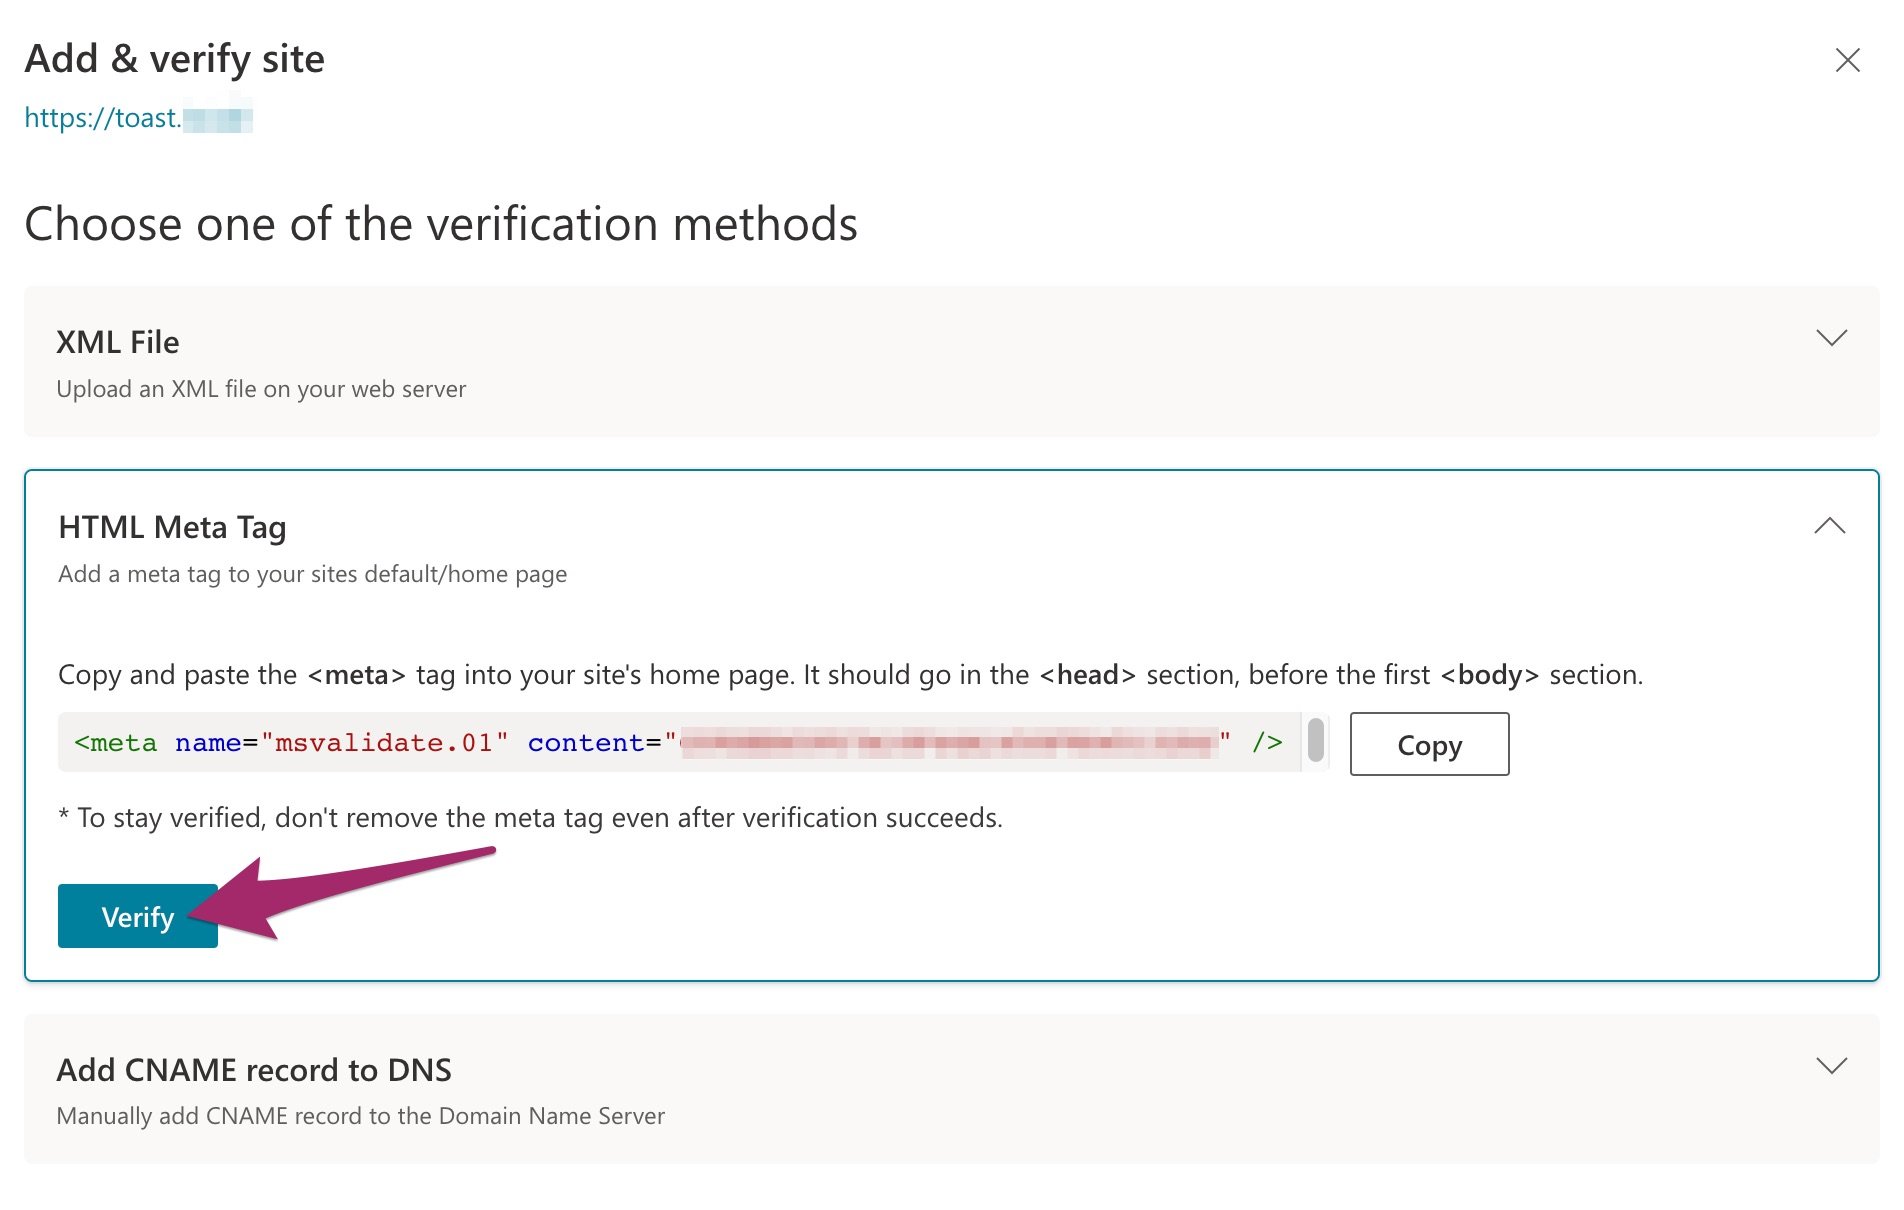 Screenshot of the Verify button in Bing Webmaster Tools.